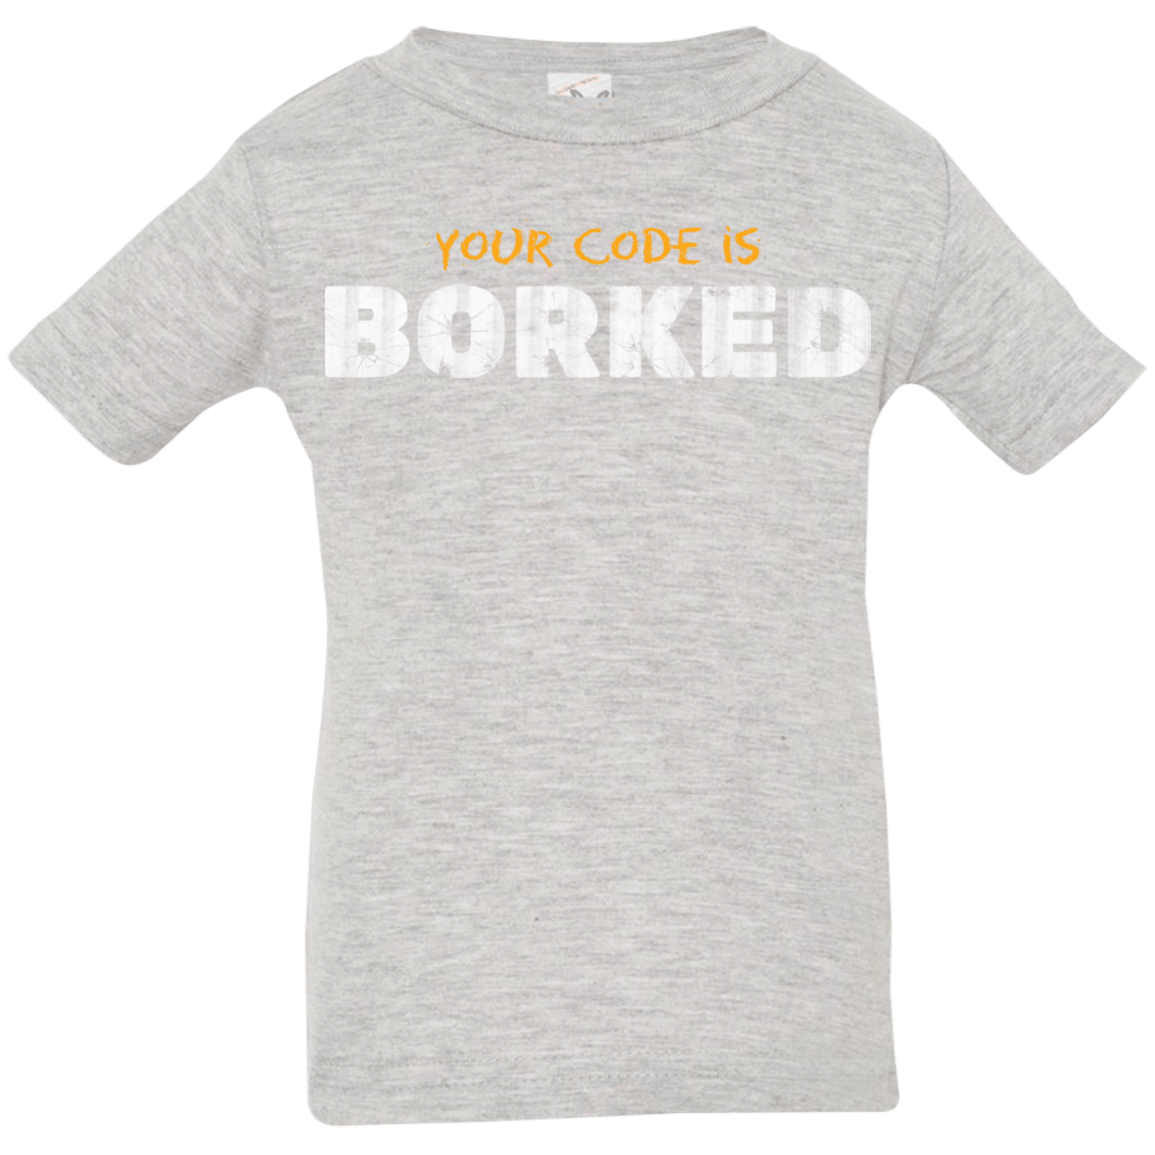 T-Shirts Heather Grey / 6 Months Your Code Is Borked Infant Premium T-Shirt